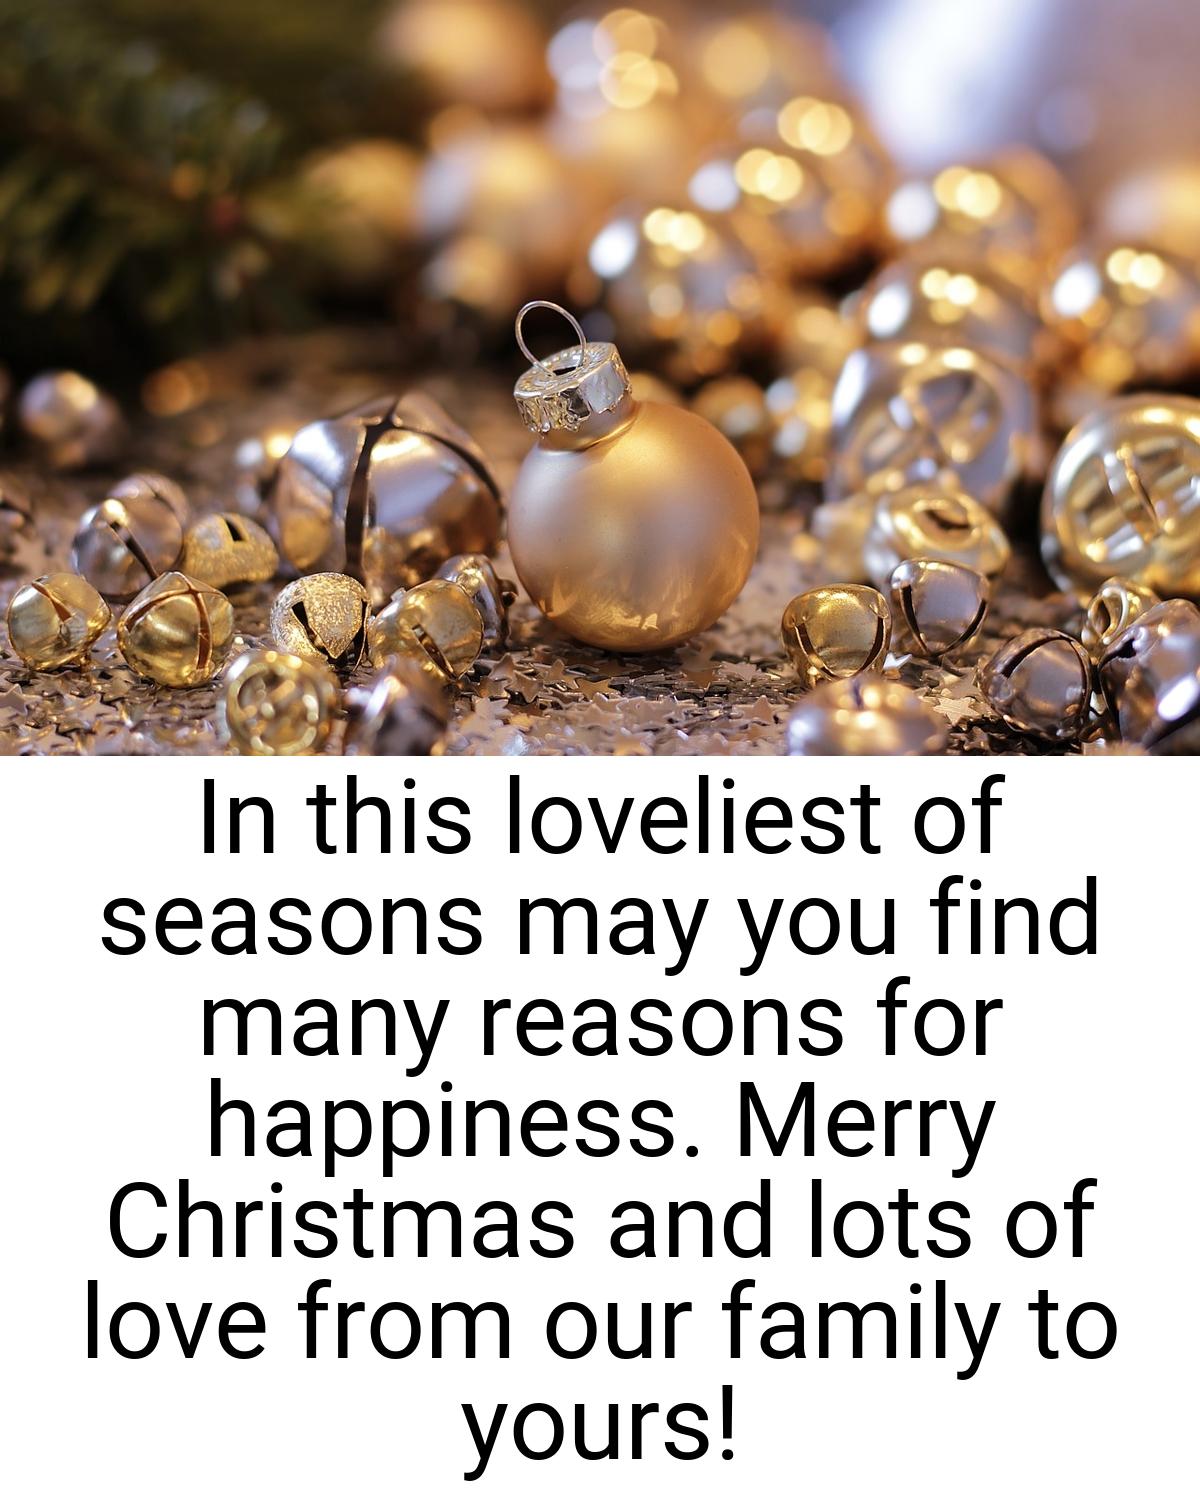 In this loveliest of seasons may you find many reasons for